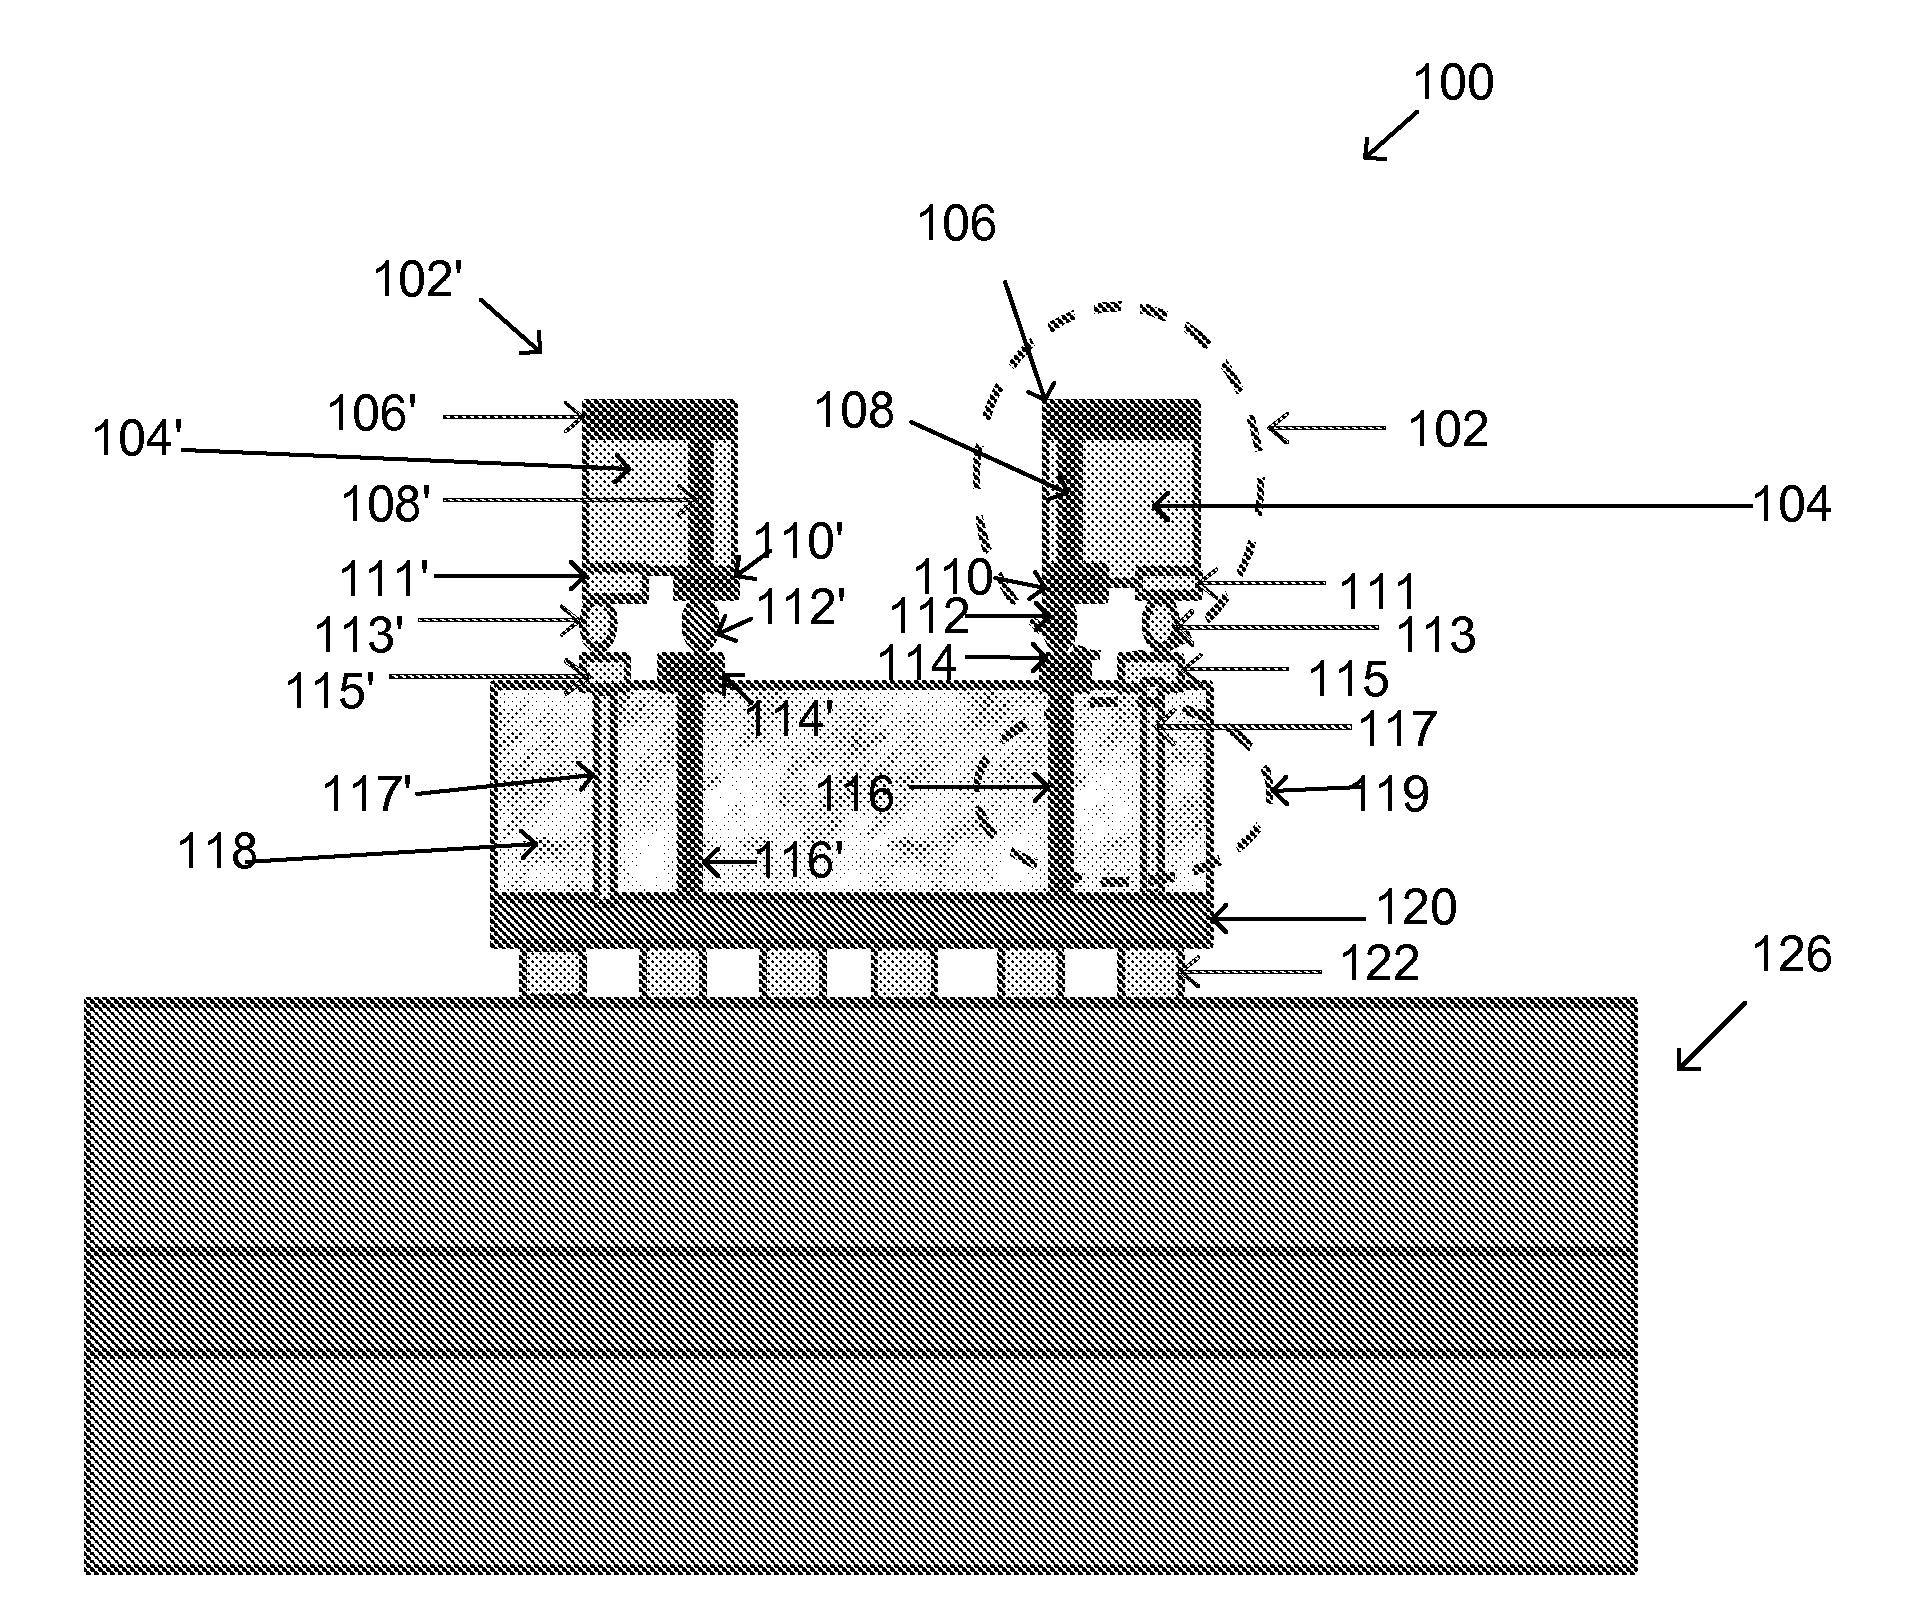 Package structures including discrete antennas assembled on a device